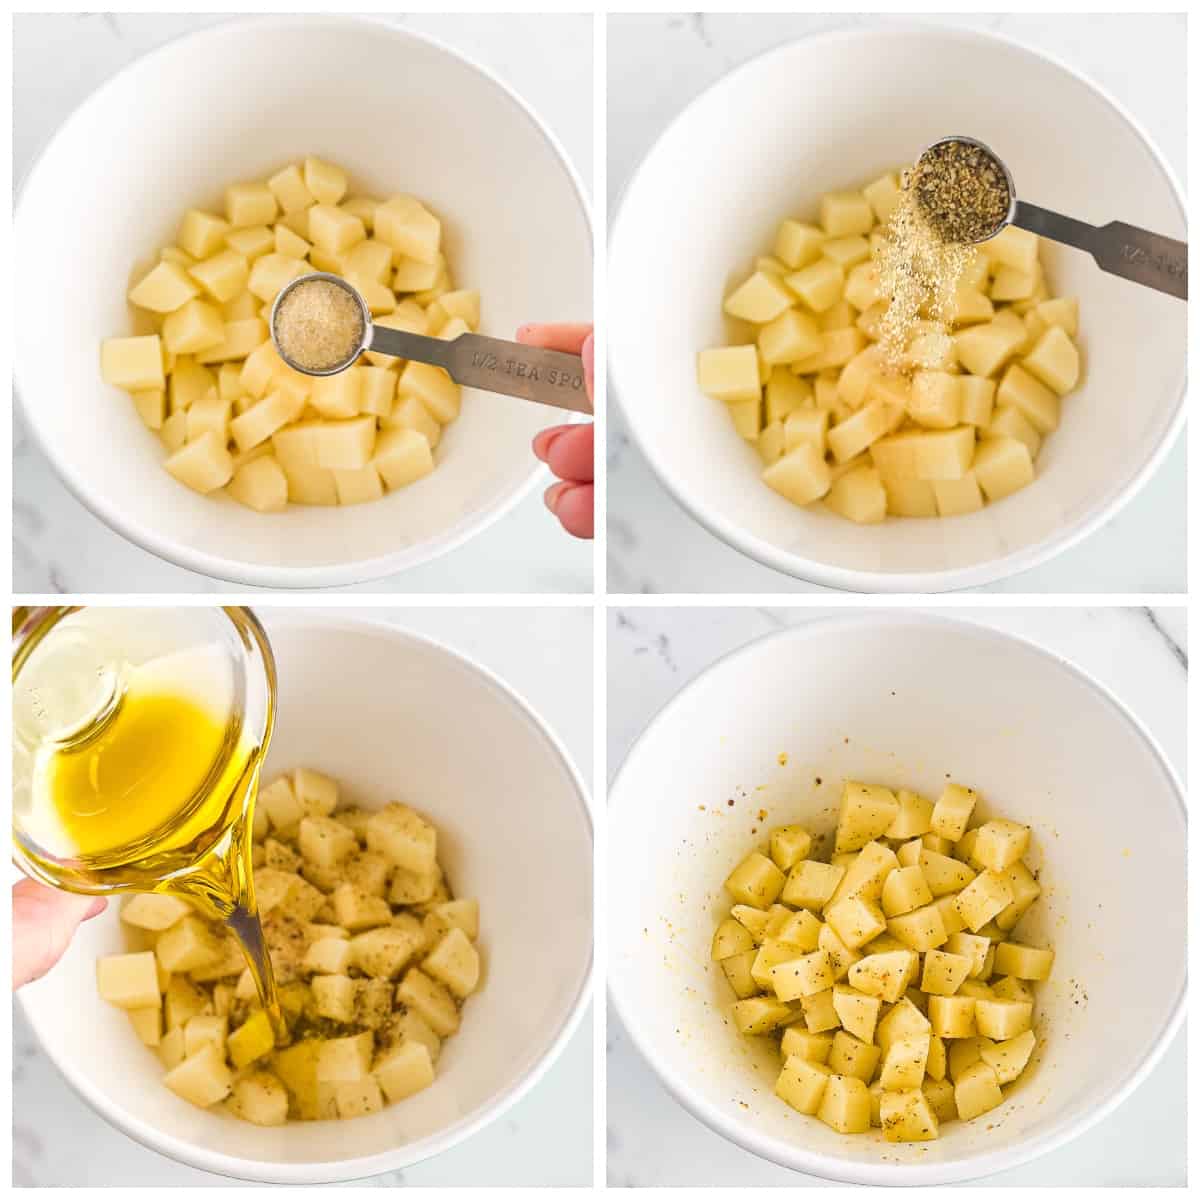 Start by peeling, rinsing, and dicing baking potatoes into quarter-inch cubes.